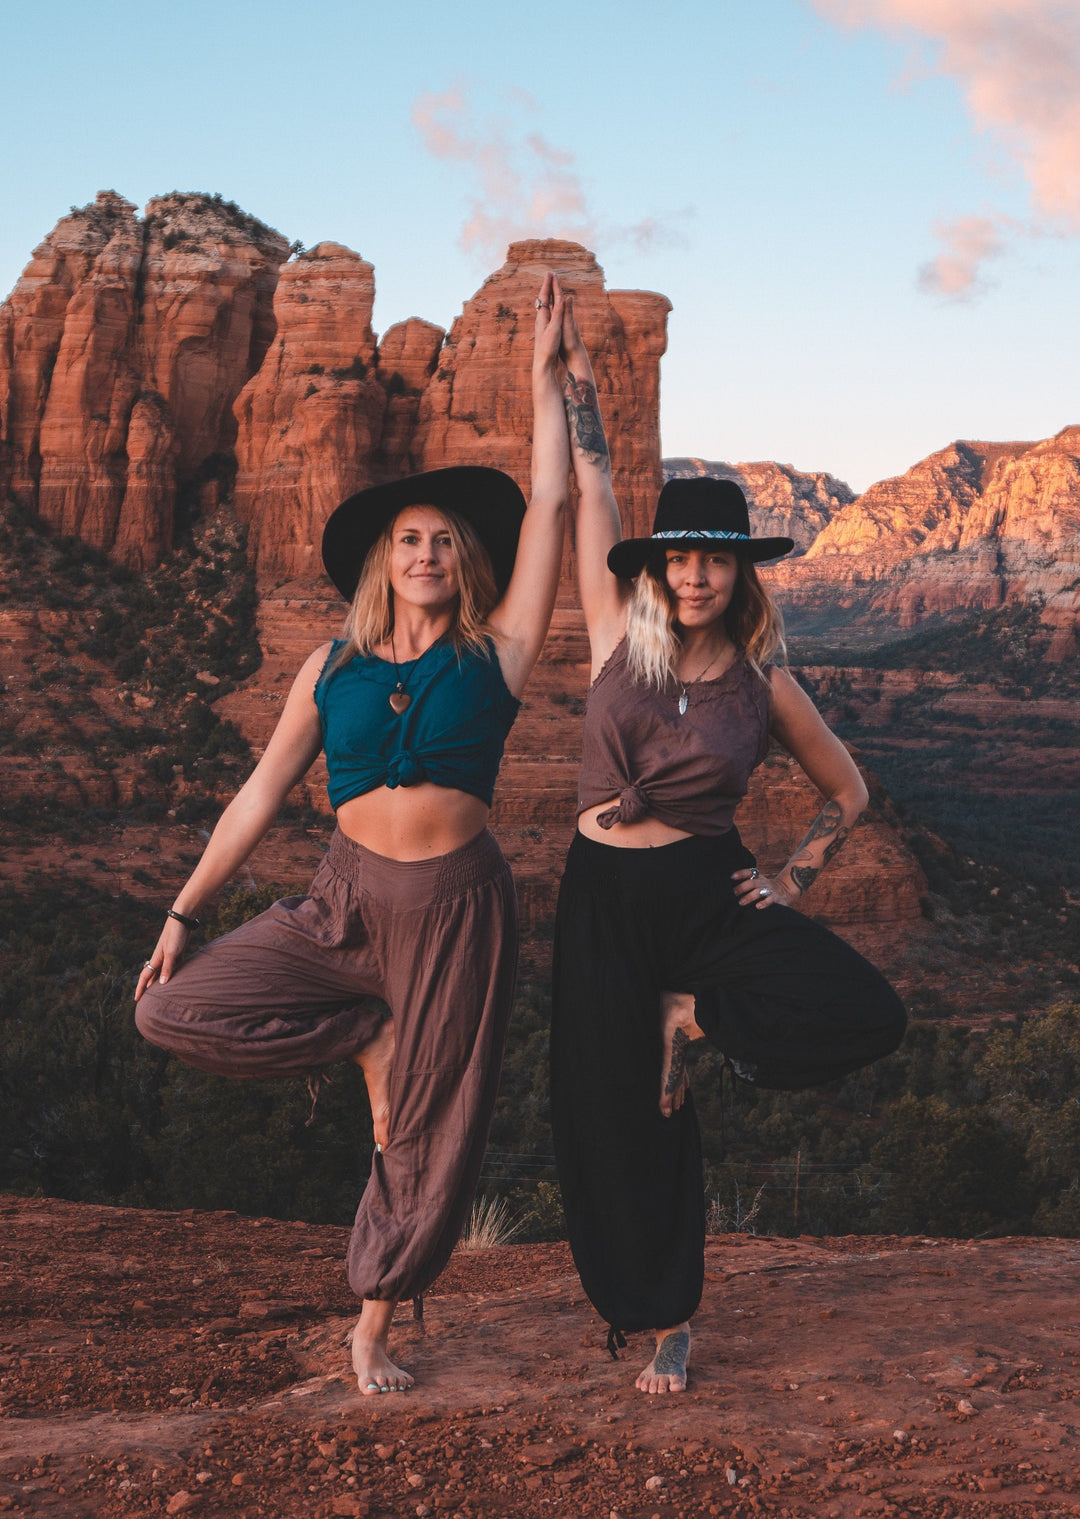 Two women are posed together wearing blousy yoga pants, tank tops and cowboy hats.